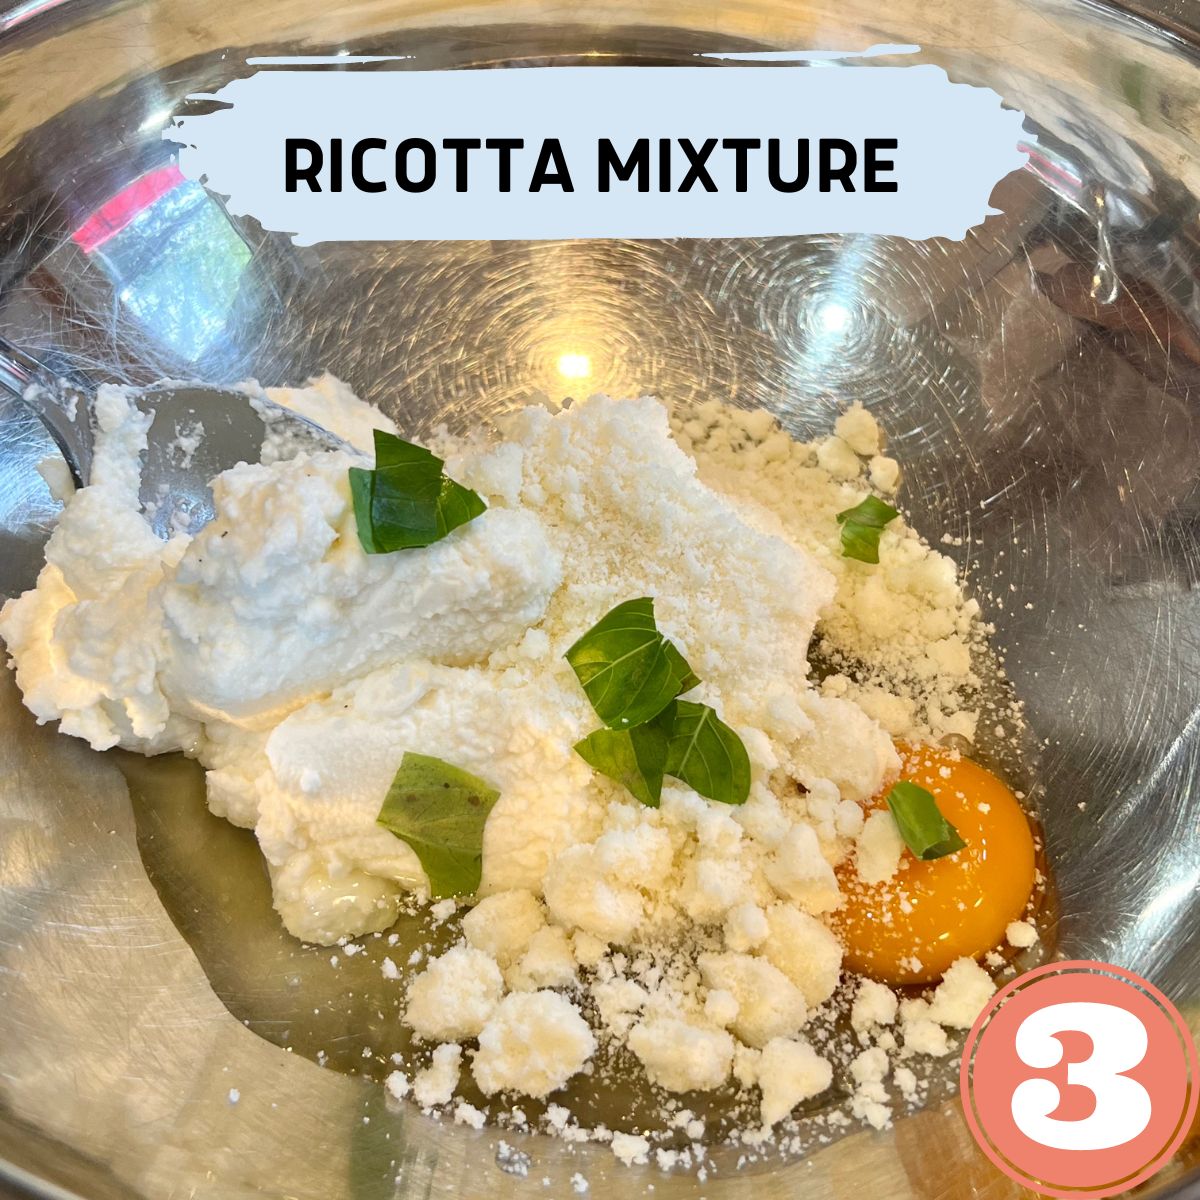 Ricotta cheese, egg,parmesan cheese and basil in a stainless steel bowl